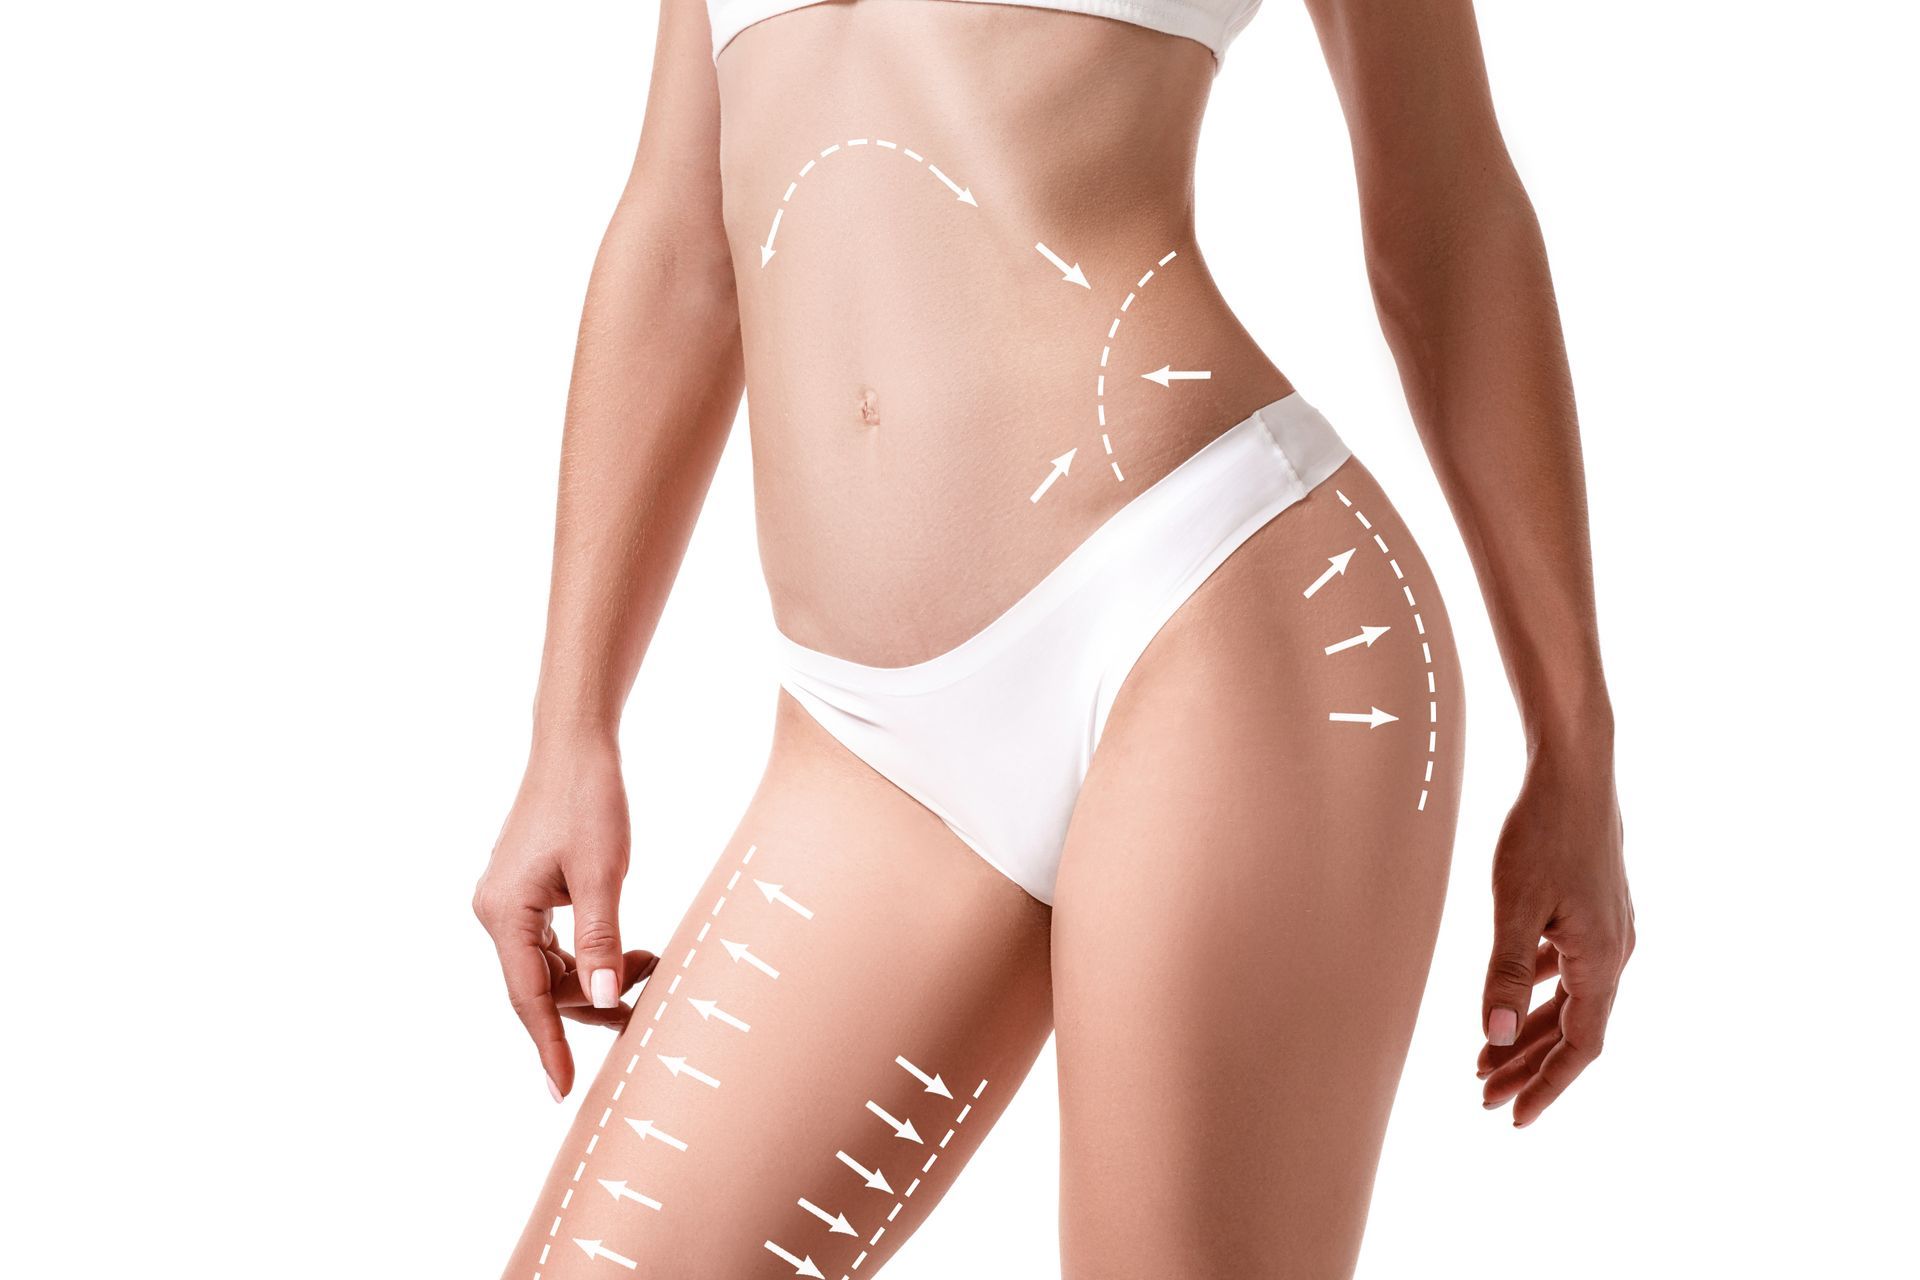 Liposuction Recovery: The crucial role